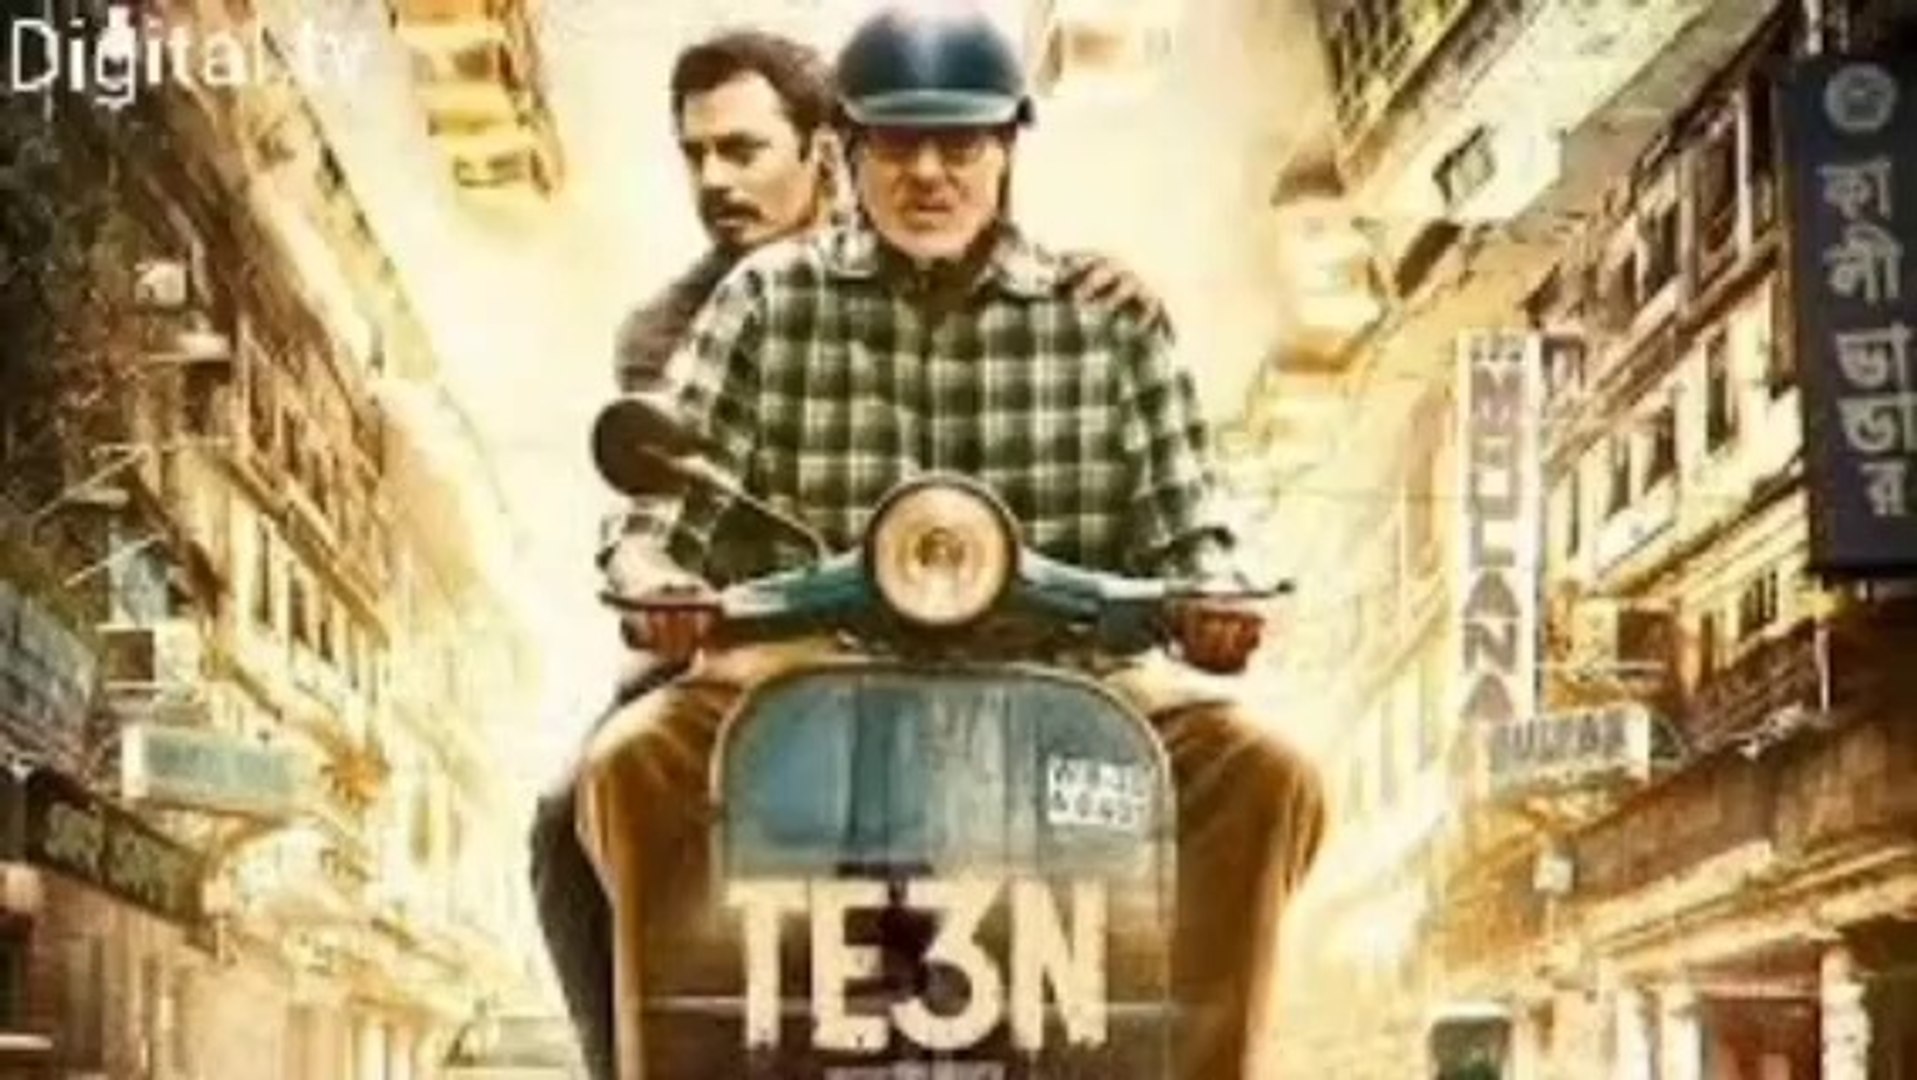 brian munch recommends Te3n Movie Online Hd